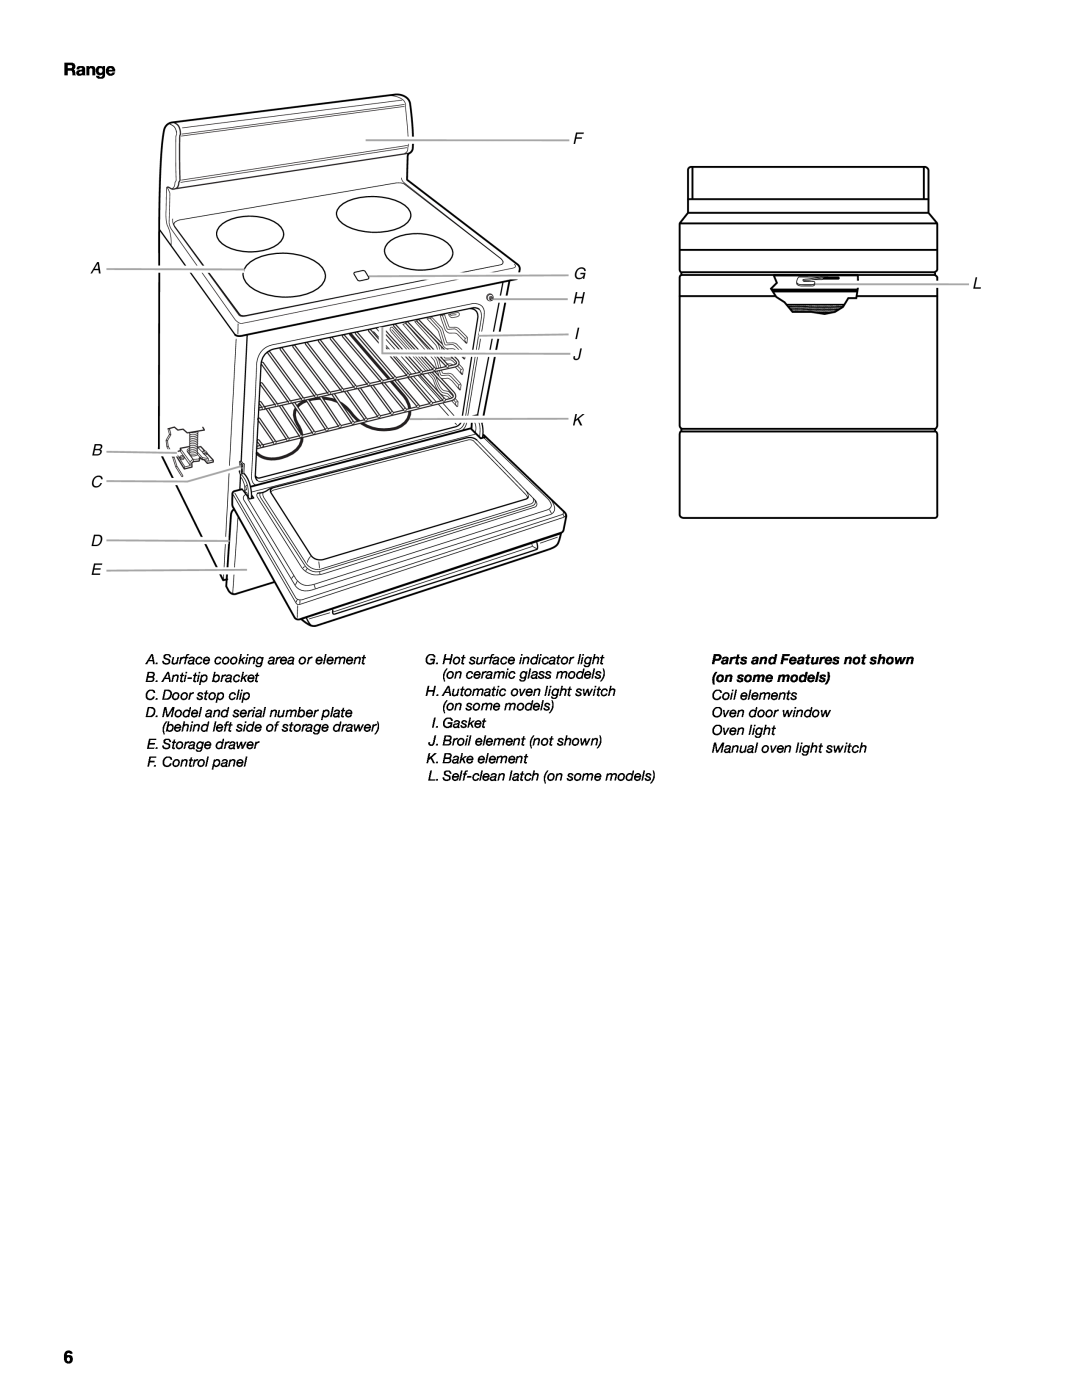 Whirlpool YIES366RS0 manual Range, I J K B C D E, Parts and Features not shown on some models 